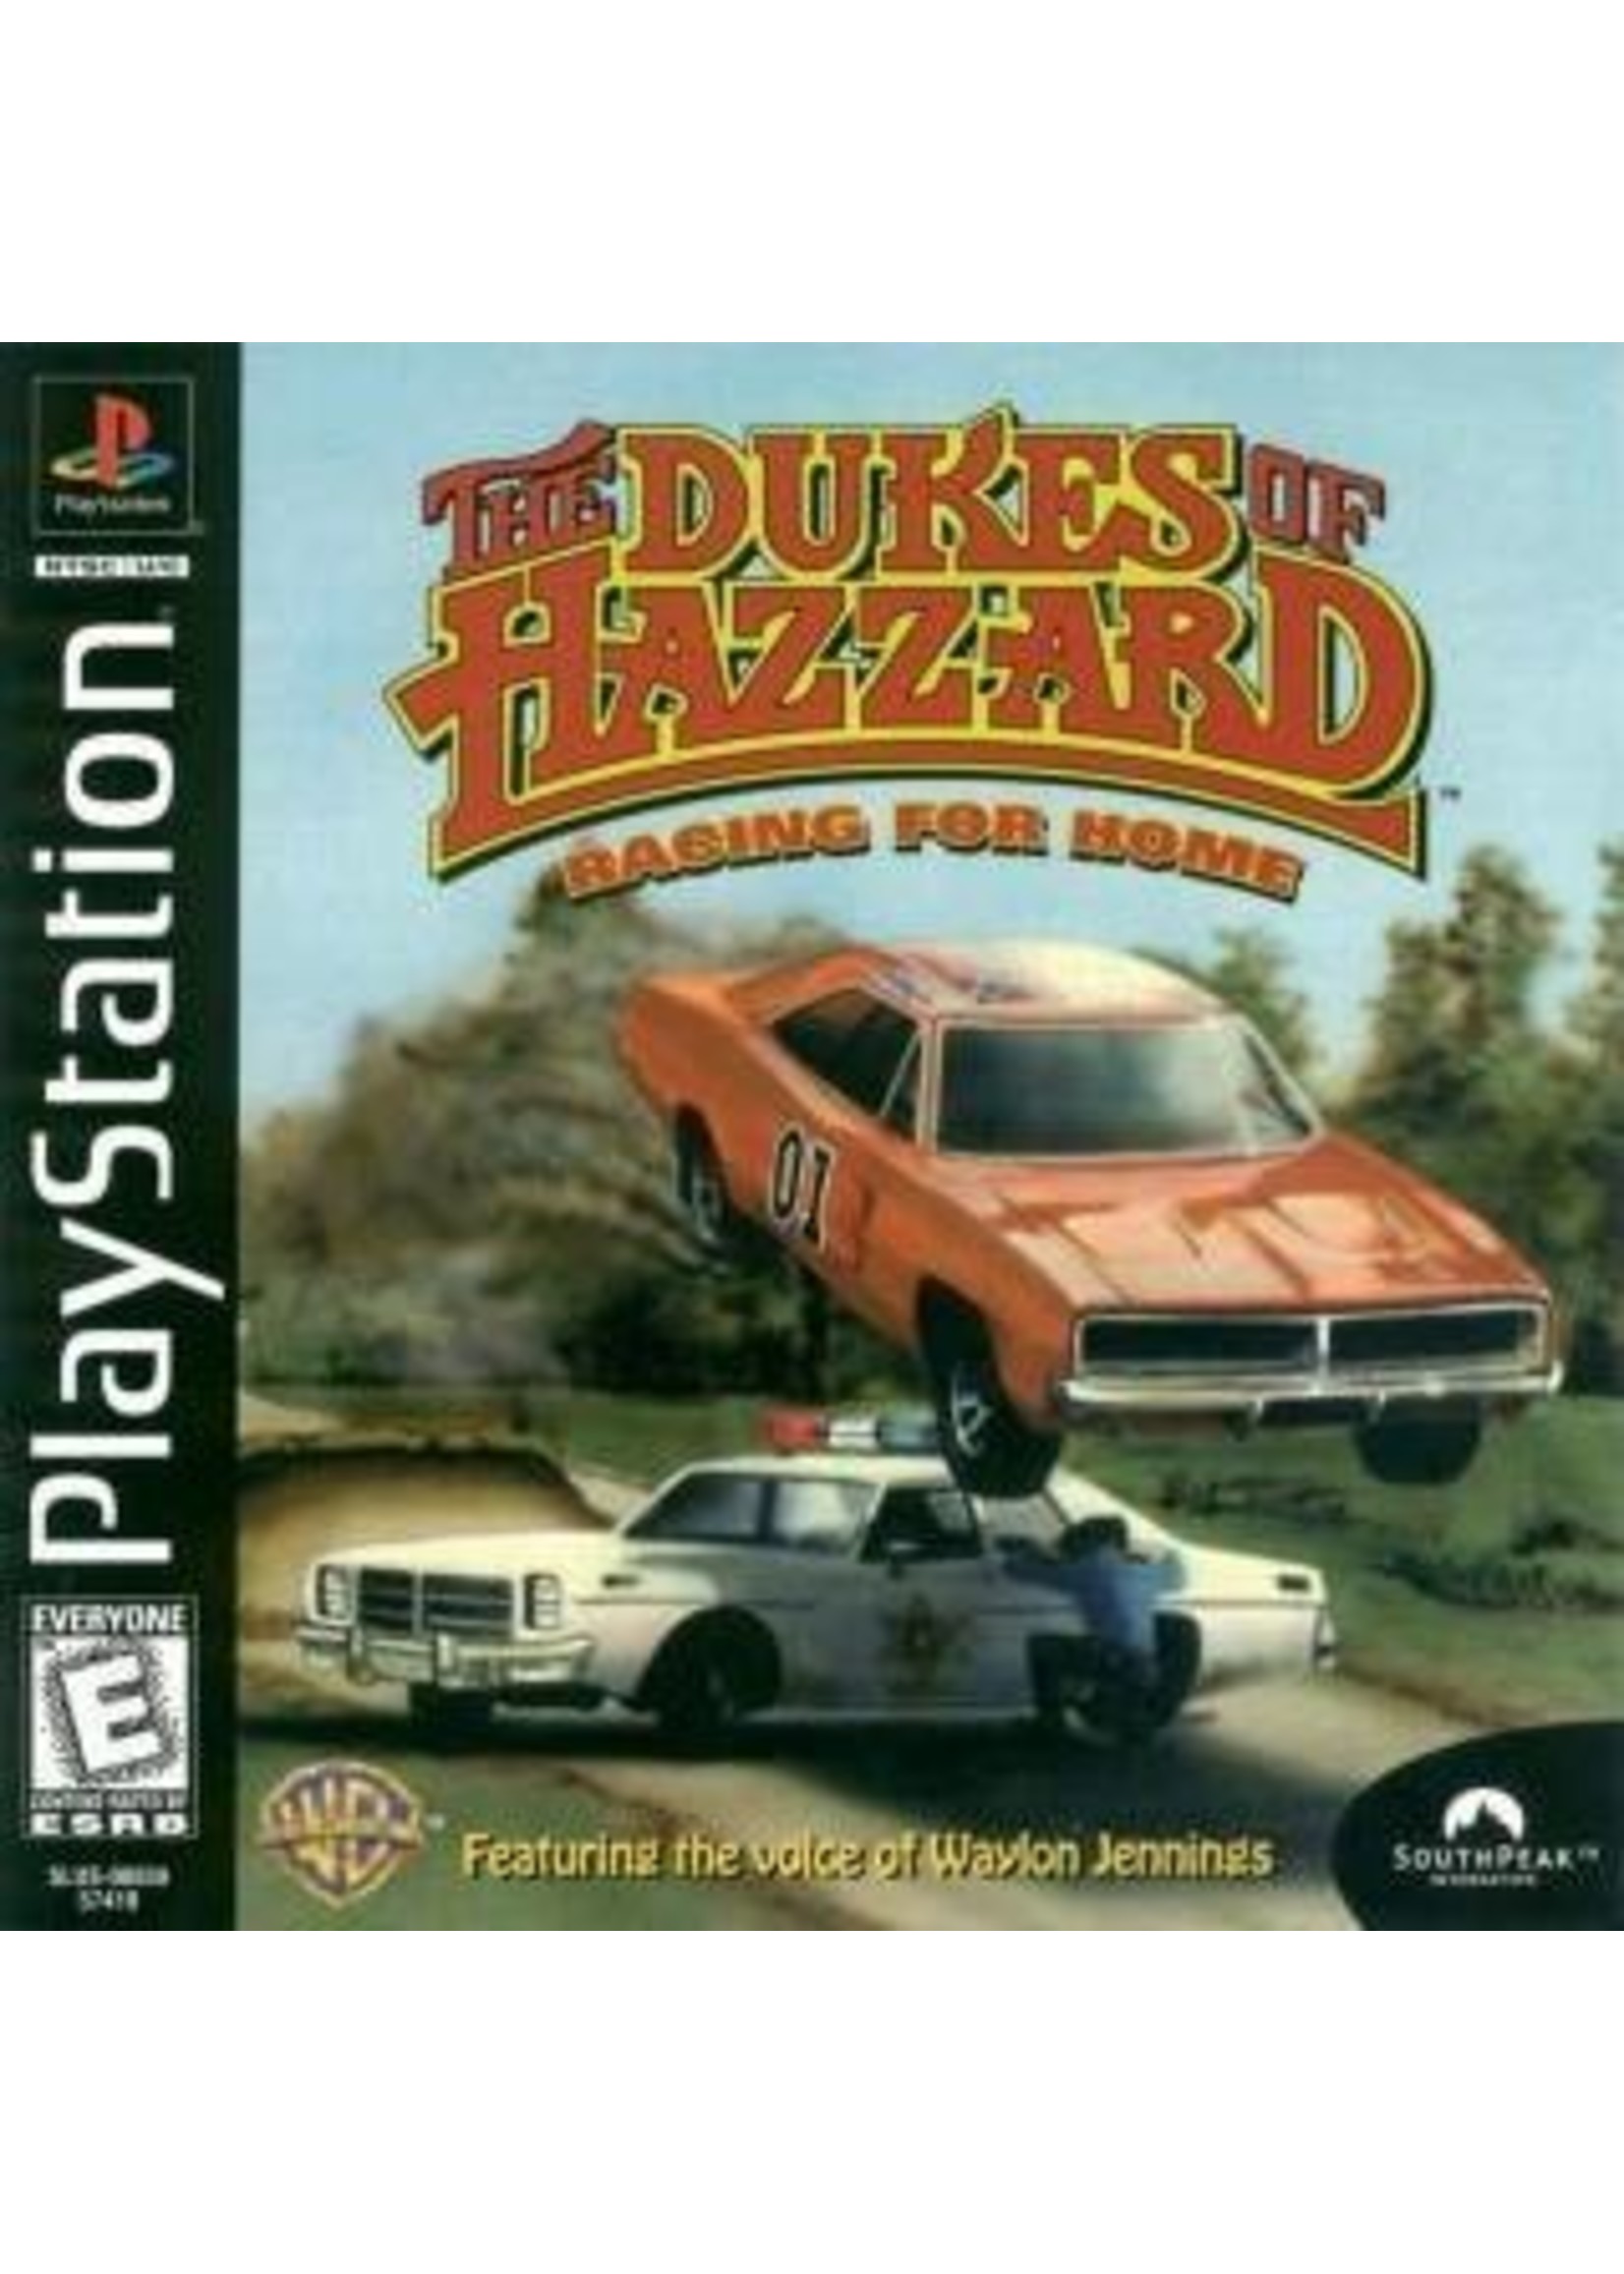 Sony Playstation 1 (PS1) Dukes of Hazzard Racing for Home